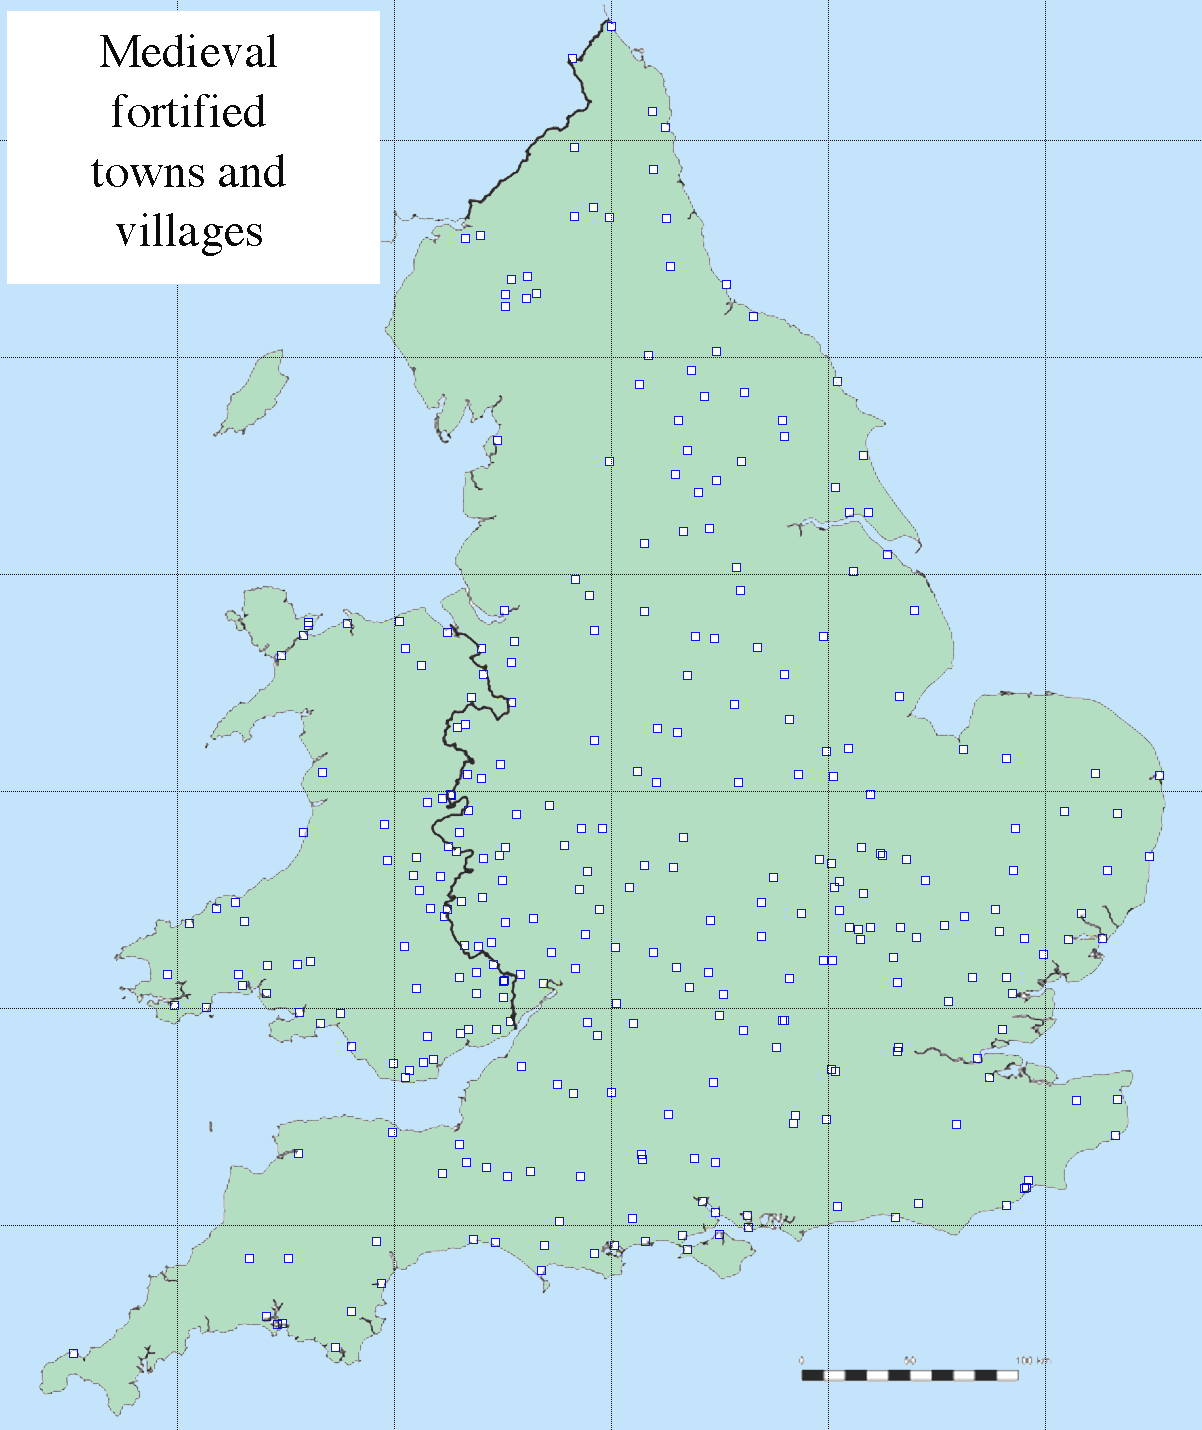 Distribution Map of Fortified Towns in England and Wales